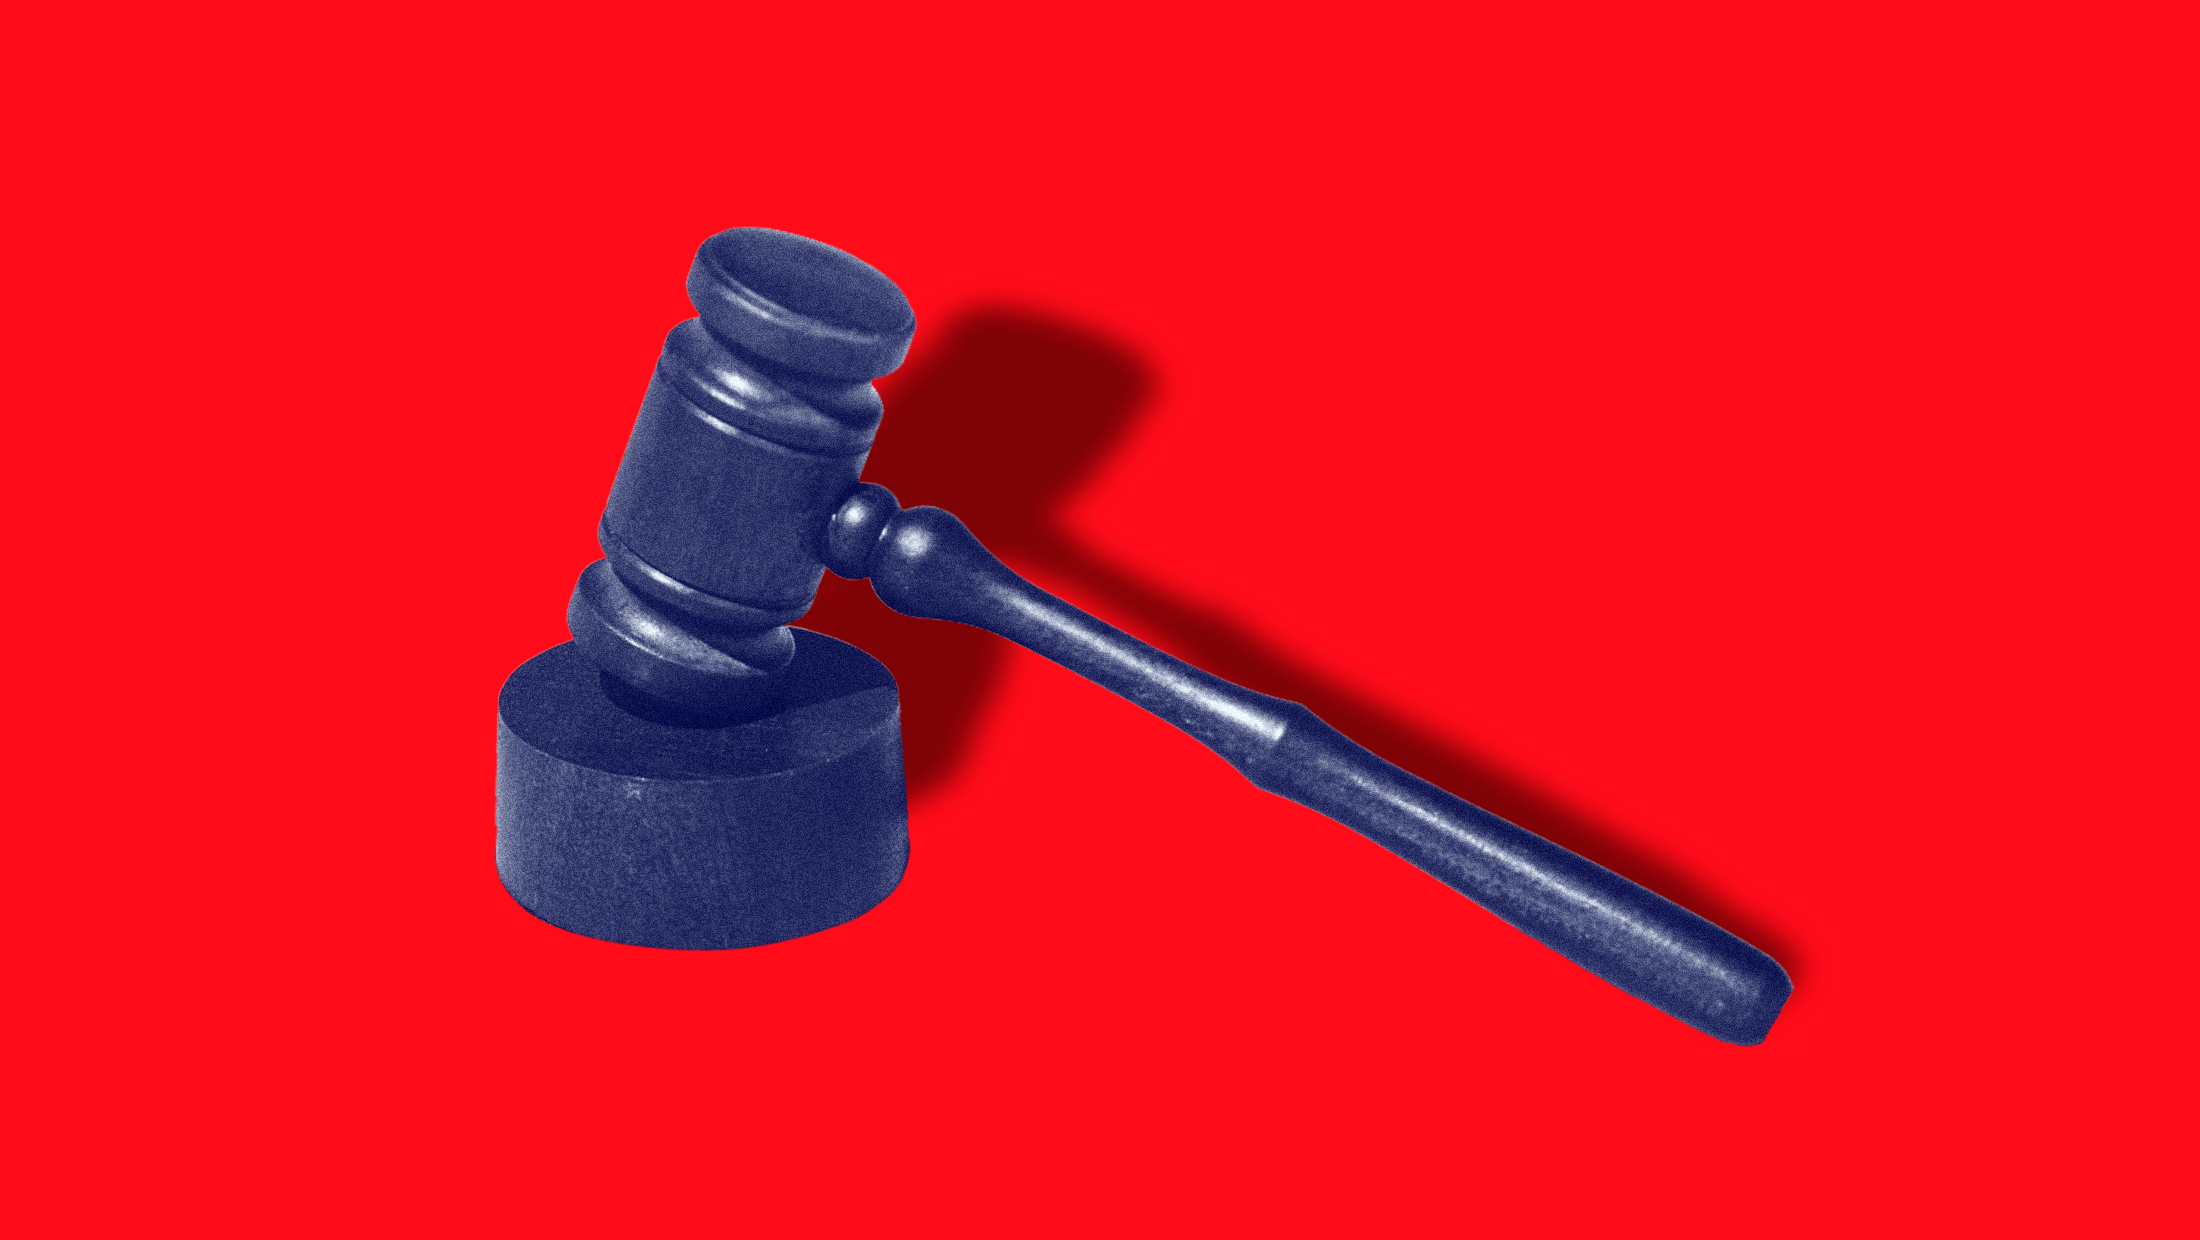 Bright red background showing a gavel with a shadow behind it